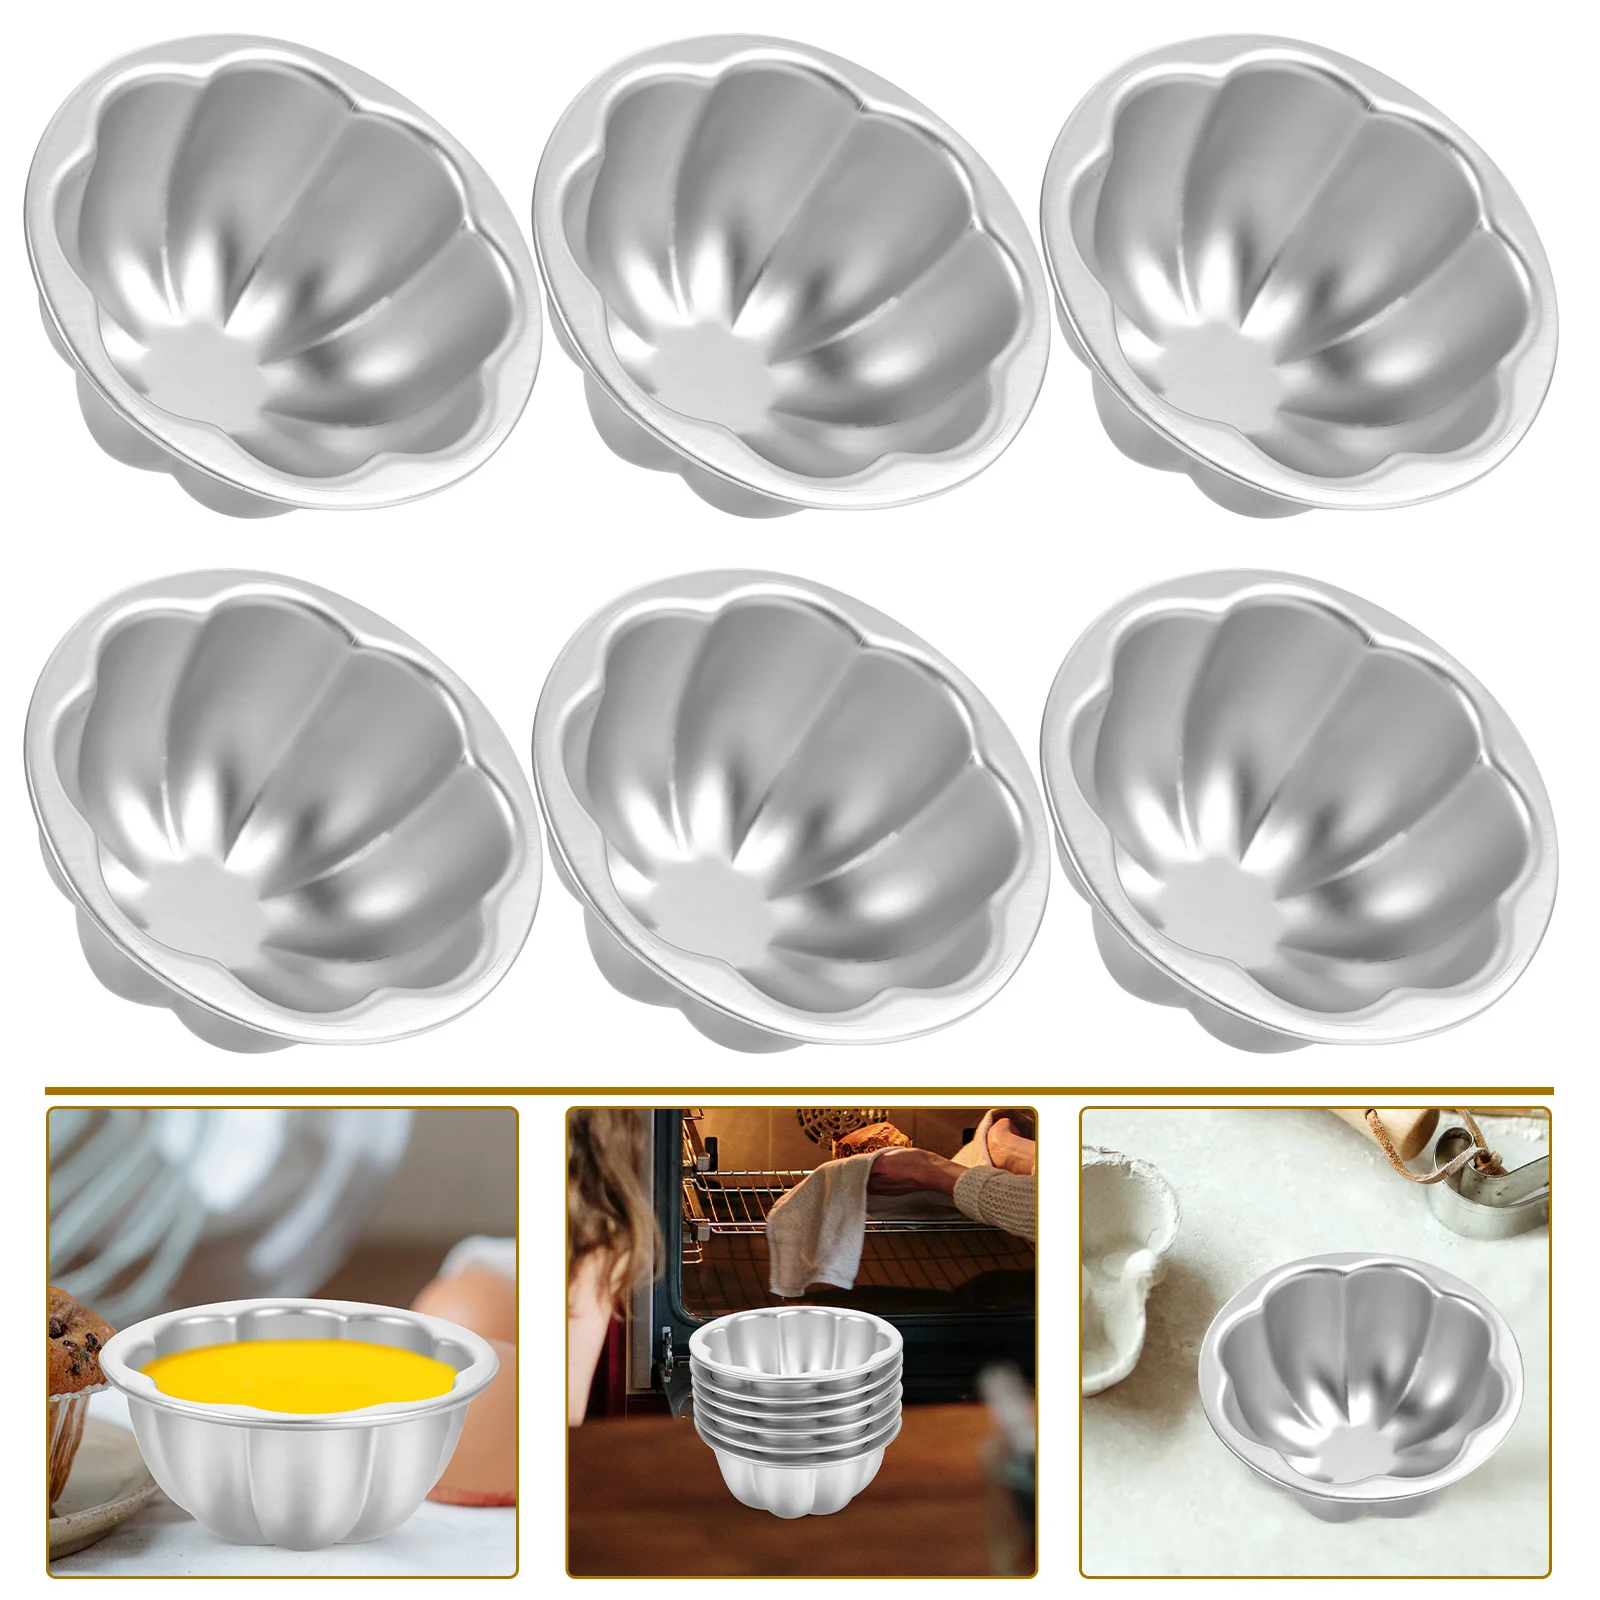 

Baking Molds Mini Tart Pan Cupcake Pudding Pans Cake Mold Cups Muffin Cup Egg Tins Metal Jelly Chocolate Stick Non Dessert